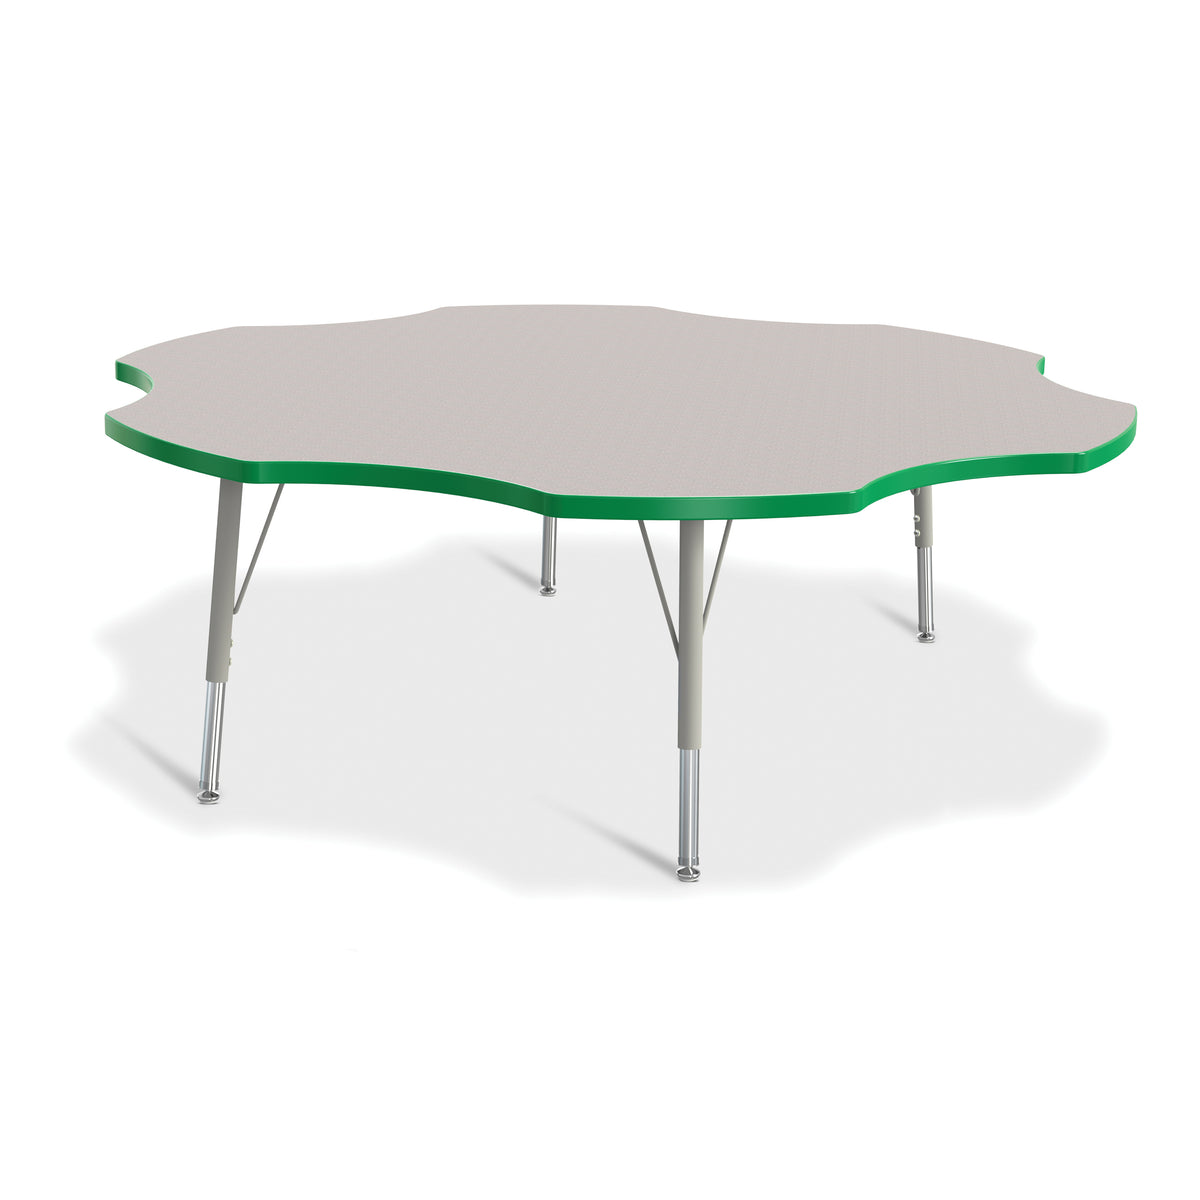 6458JCE119, Berries Six Leaf Activity Table - 60", E-height - Freckled Gray/Green/Gray